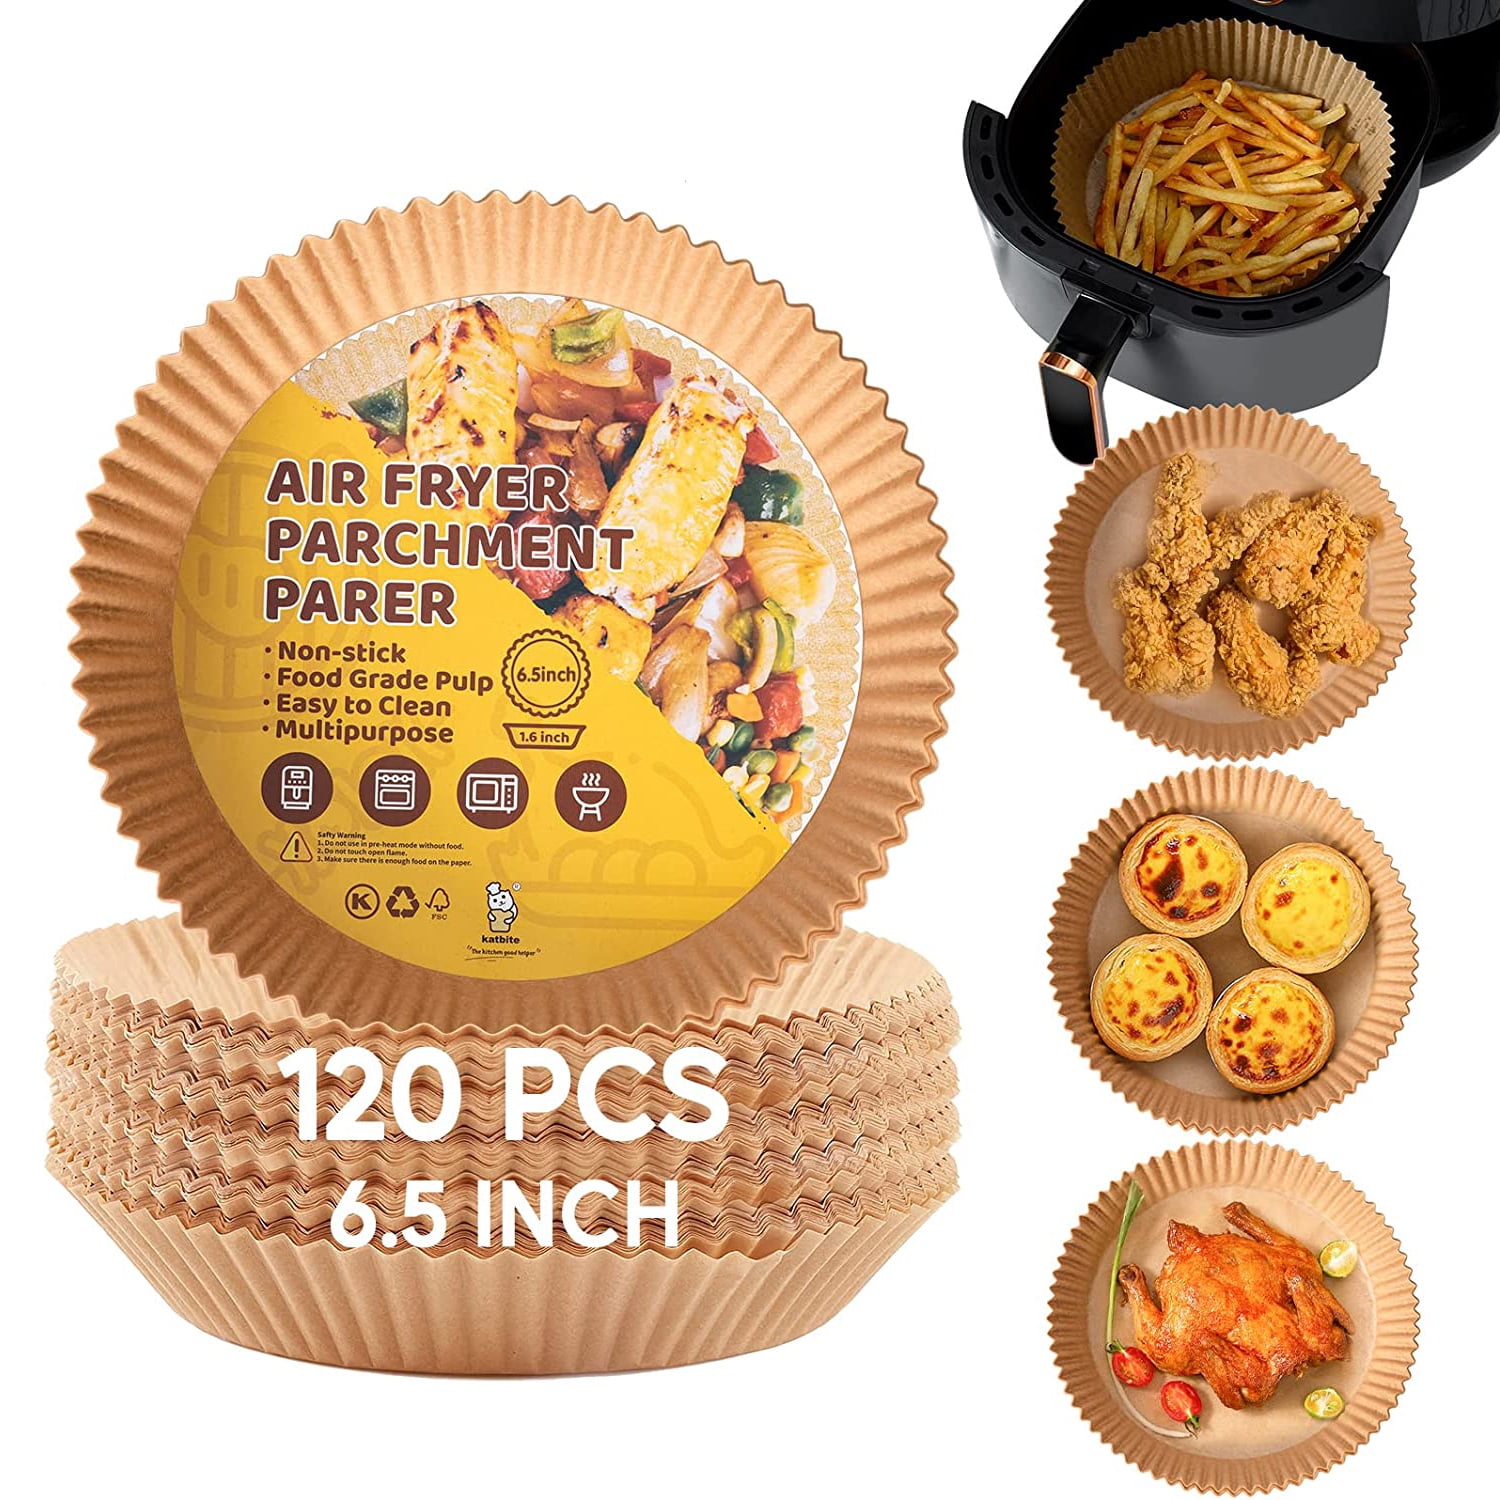 M BUDER 100 PCS Air Fryer Liners Disposable, 6.3inch Upgraded Air Fryer  Parchment Paper, Non-stick,Oil-proof,Water-proof Air Fryer Paper,Bake Paper  for Air Fryer Baking Roasting Microwave Oven-Wood 